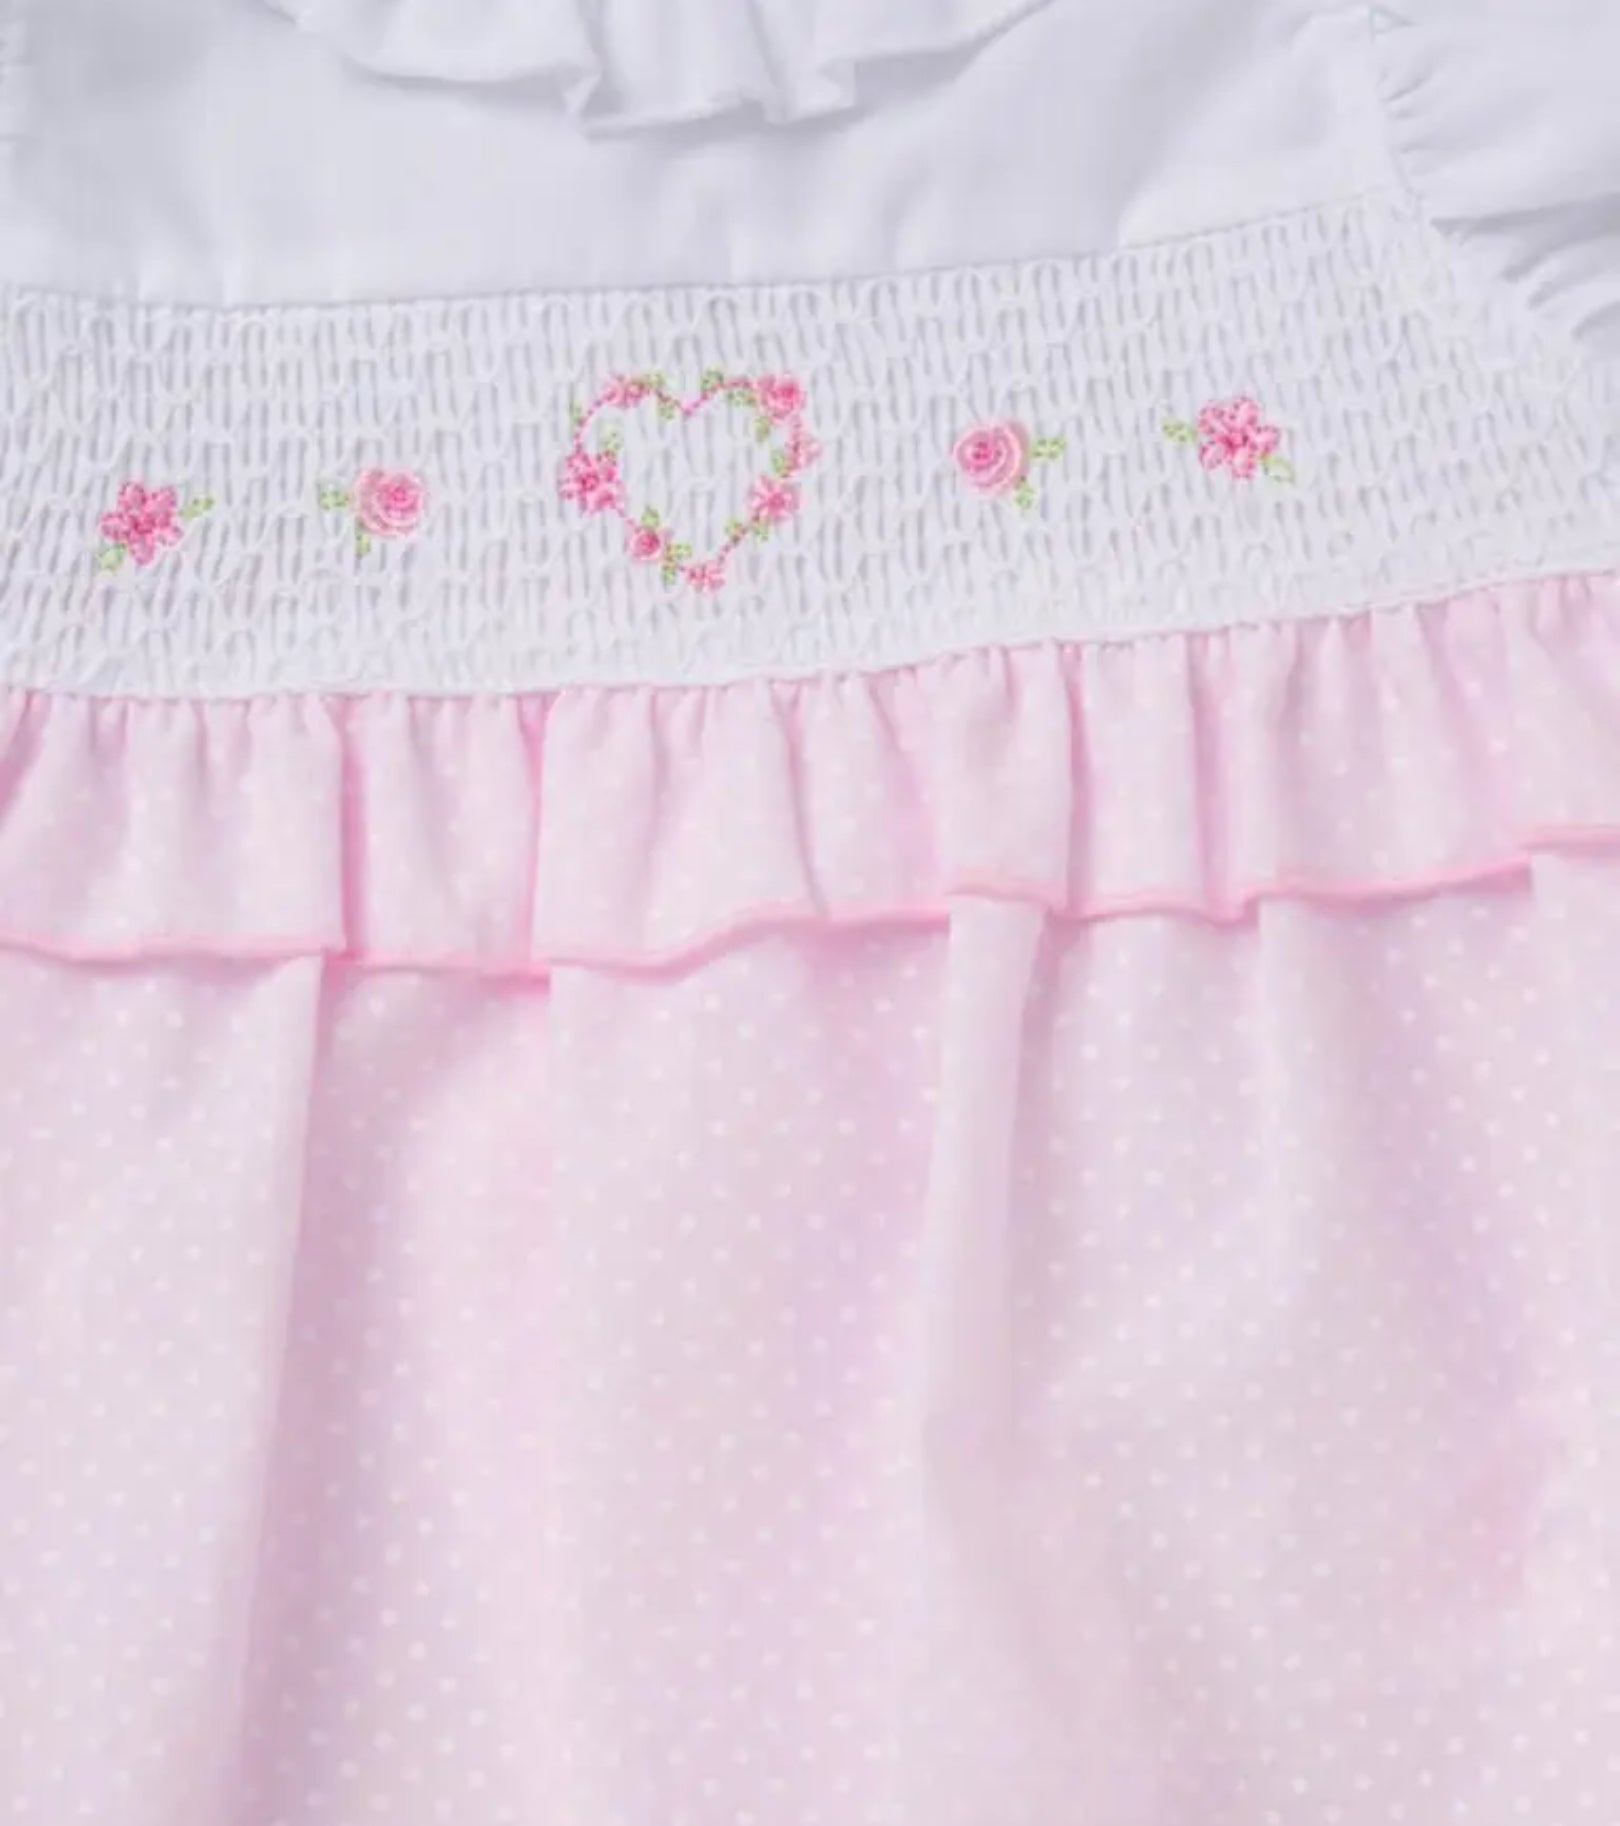 Rock-a-Bye Baby Pink & White Dot & embroidered Romper